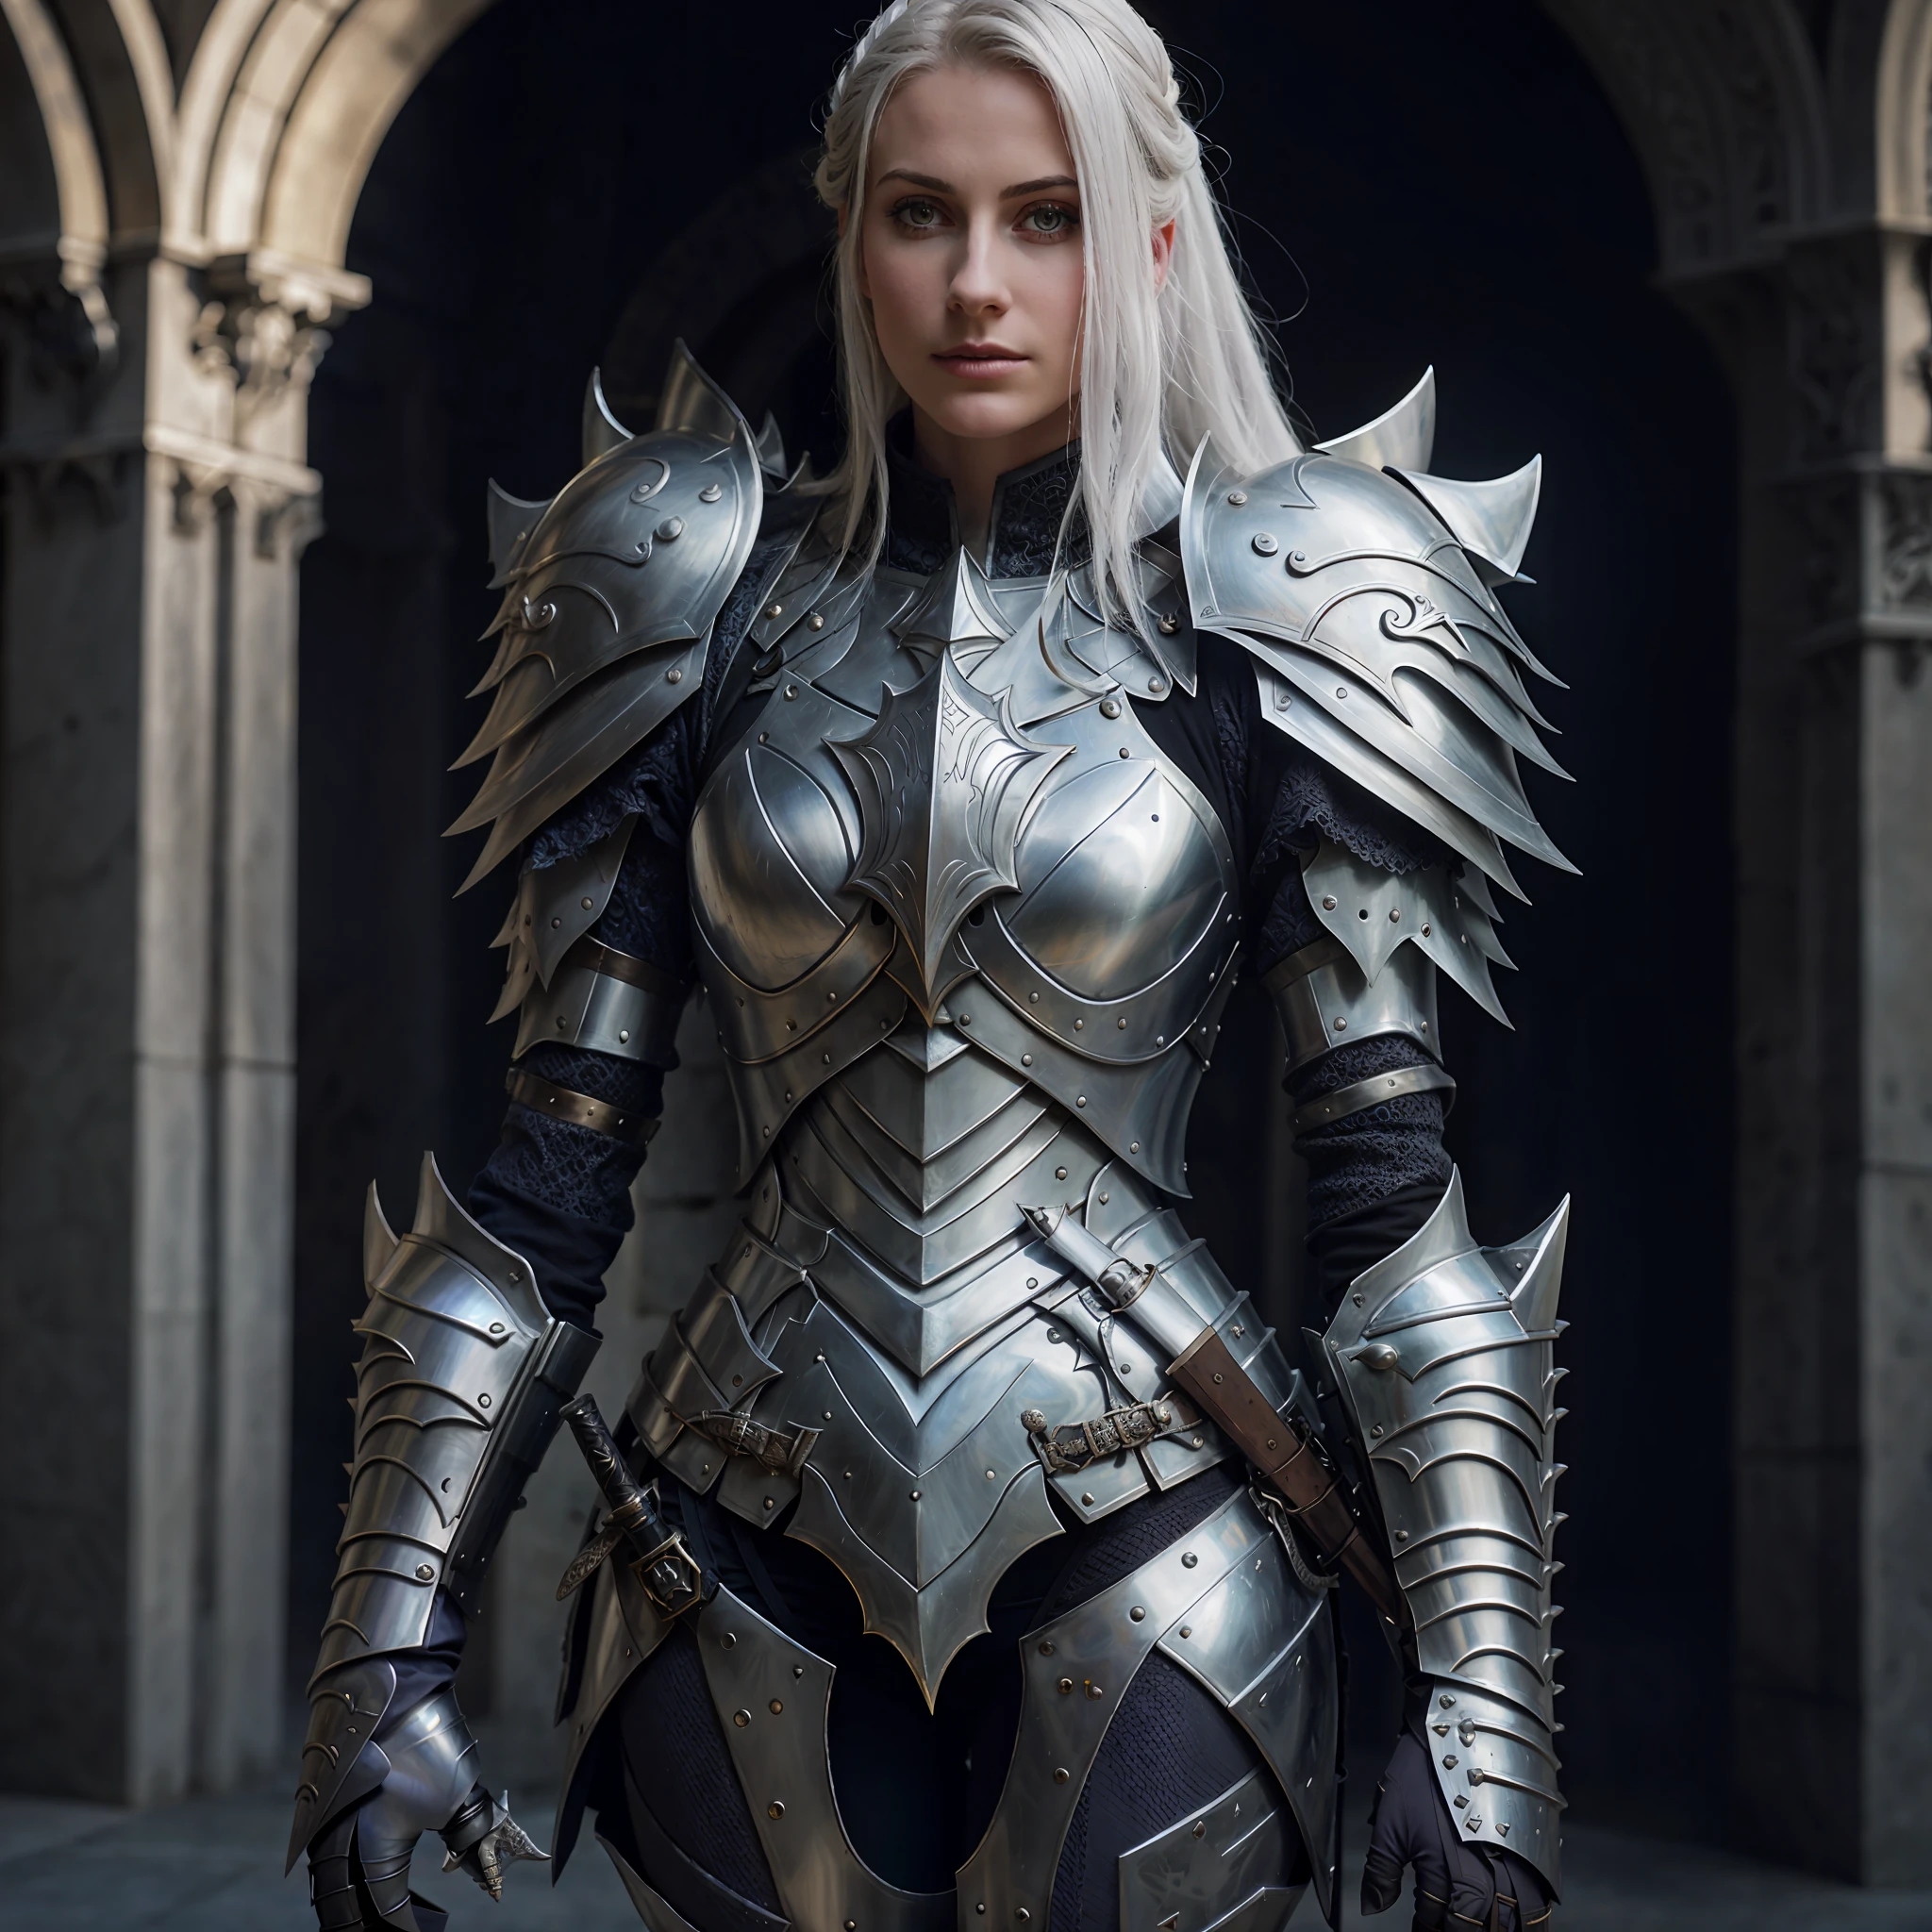 arafed woman in armor standing in a building with a sword, girl in knight armor, beautiful female knight, stunning armor, wearing intricate steel armor, fantasy warrior in full armor, wearing fantasy armor, of a beautiful female knight, beautiful armor, female knight, very stylish fantasy armor, female armor, gorgeous female paladin, portrait of female paladin, silver metal armor